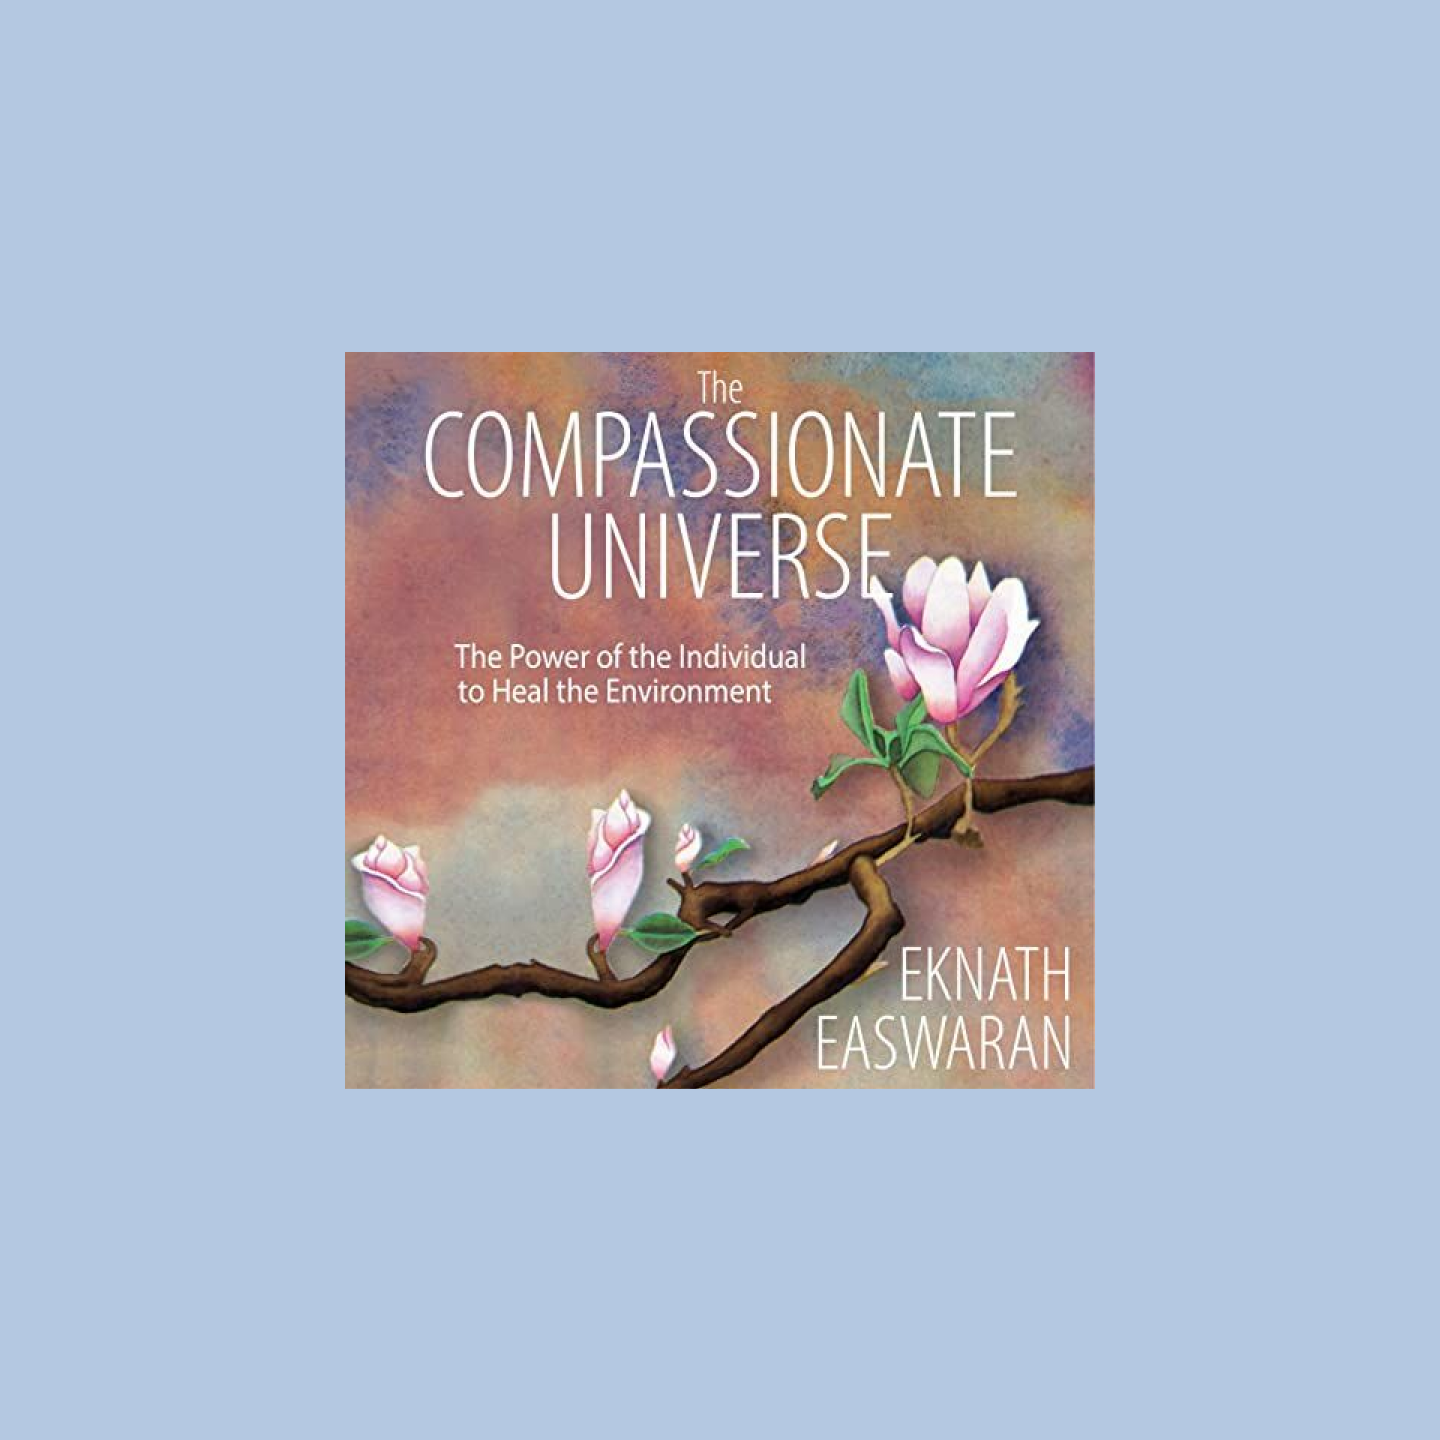 Audiobook cover reads The Compassionate Universe with a cherry blossom tree